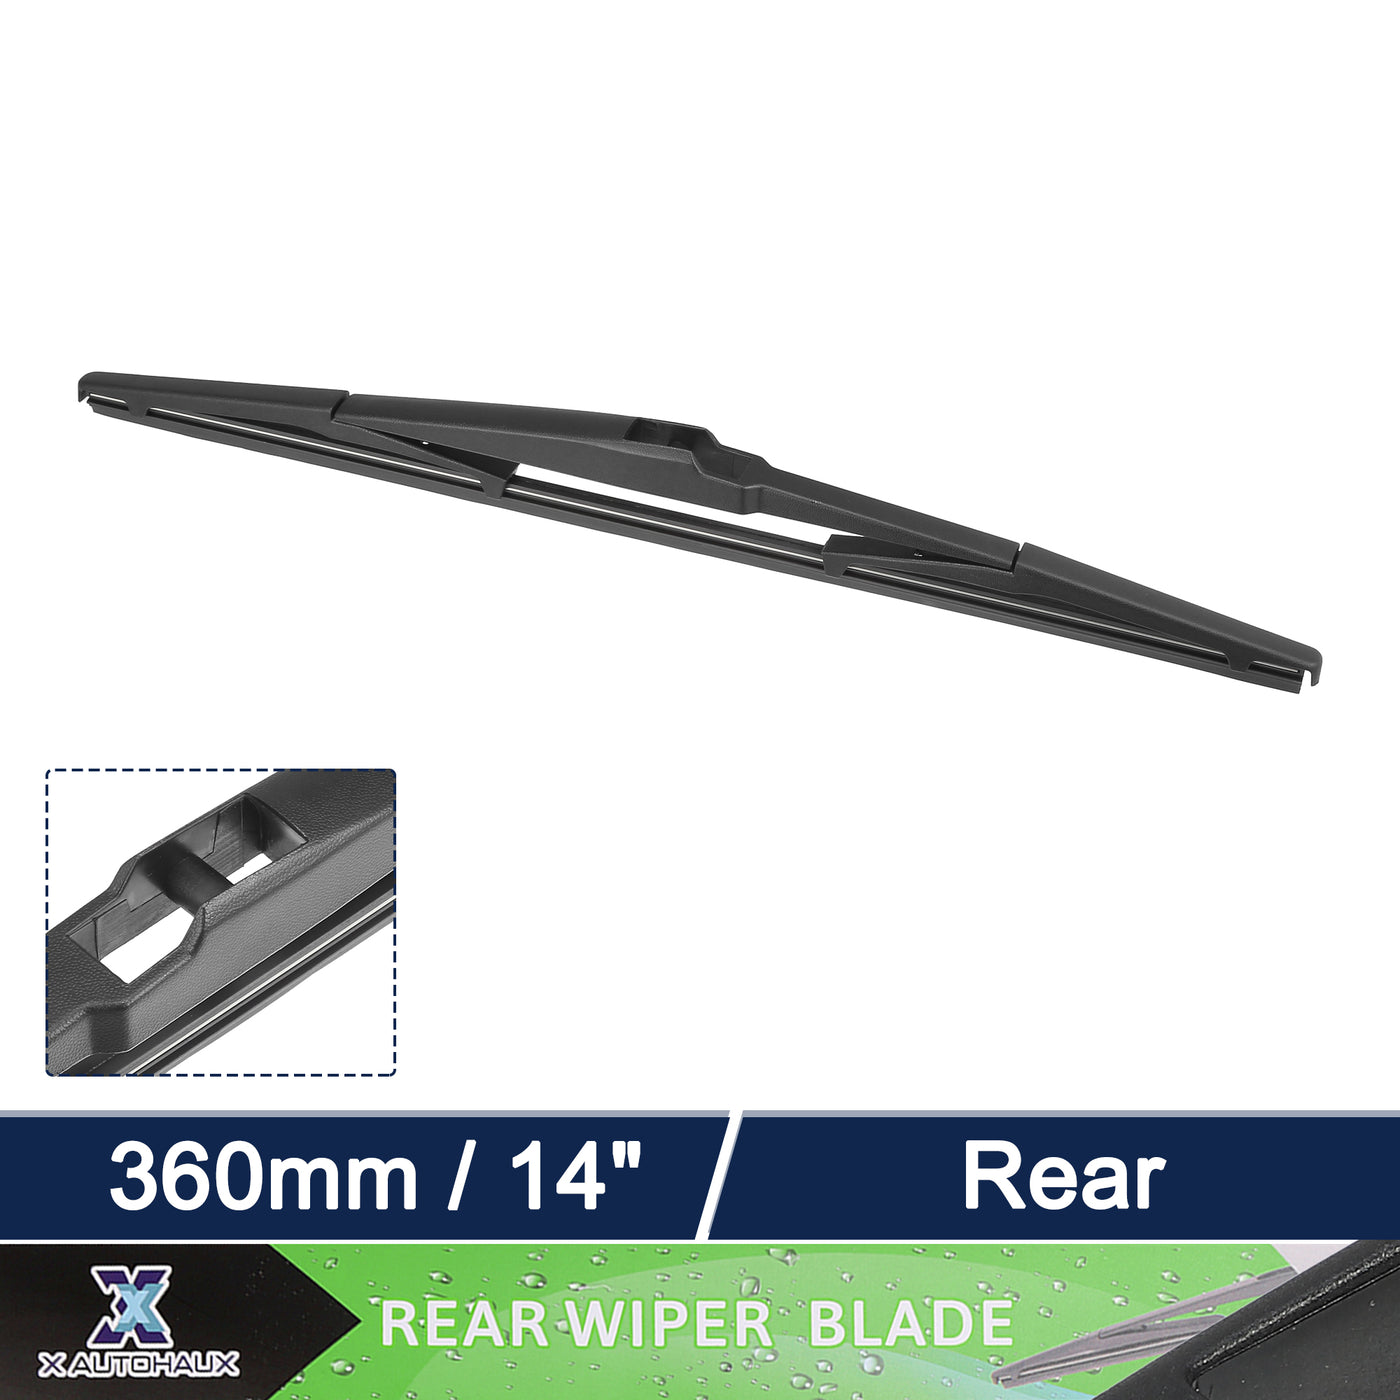 X AUTOHAUX Rear Windshield Wiper Blade Replacement for Hyundai Santa Fe 2006-2012 for Kia Carens 2006-2012 for Mazda CX-5 2011-2019